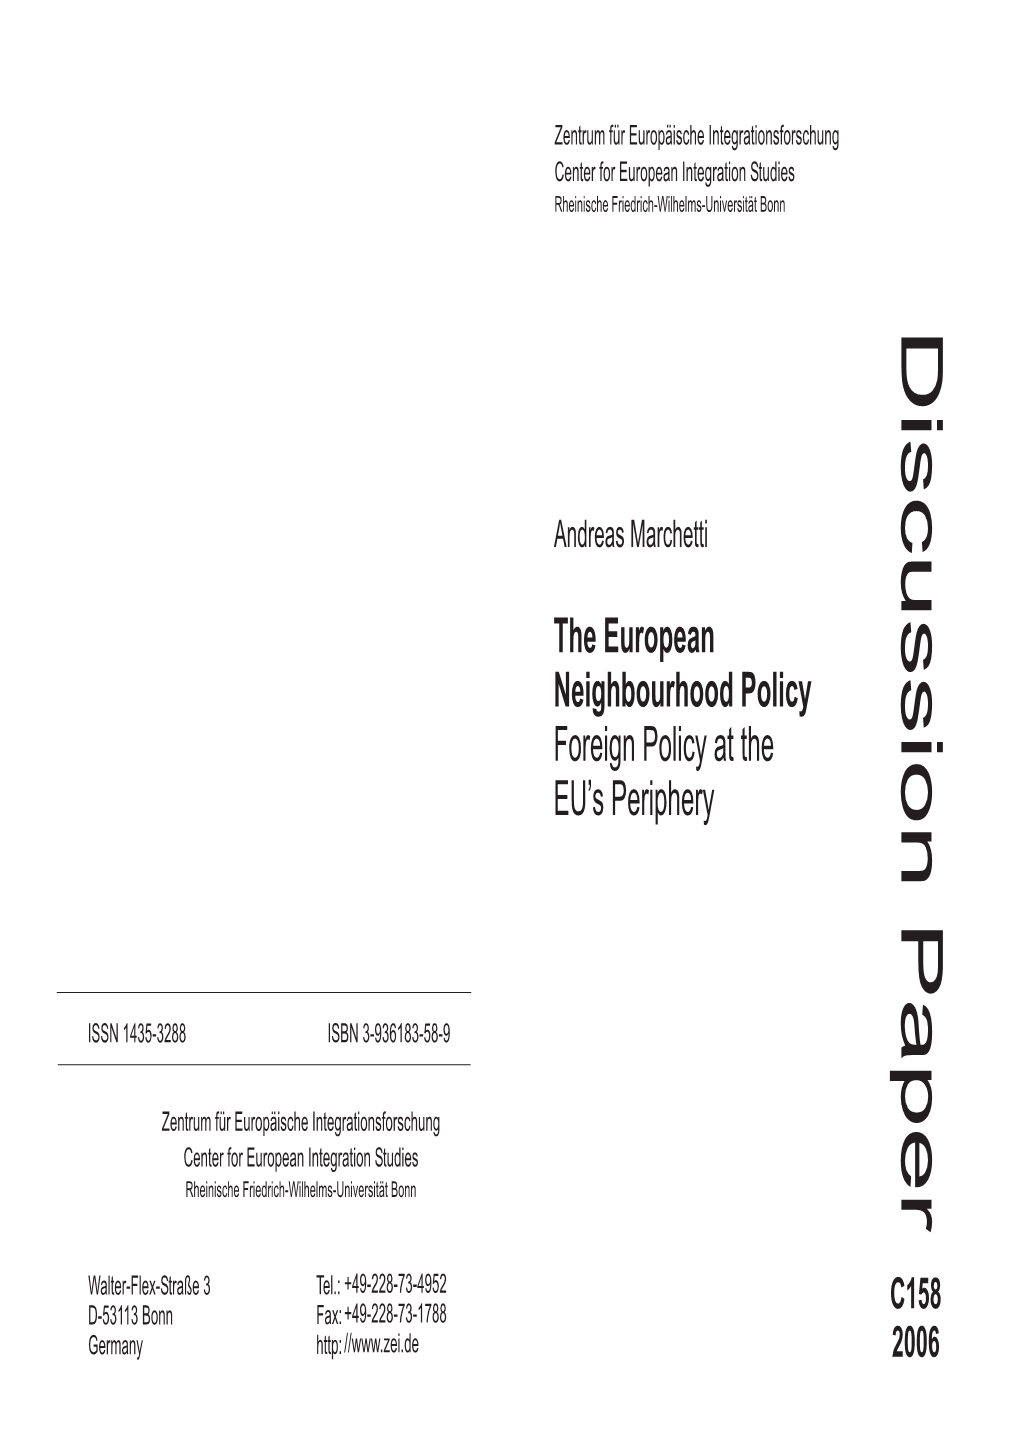 The European Neighbourhood Policy Foreign Policy at the EU’S Periphery